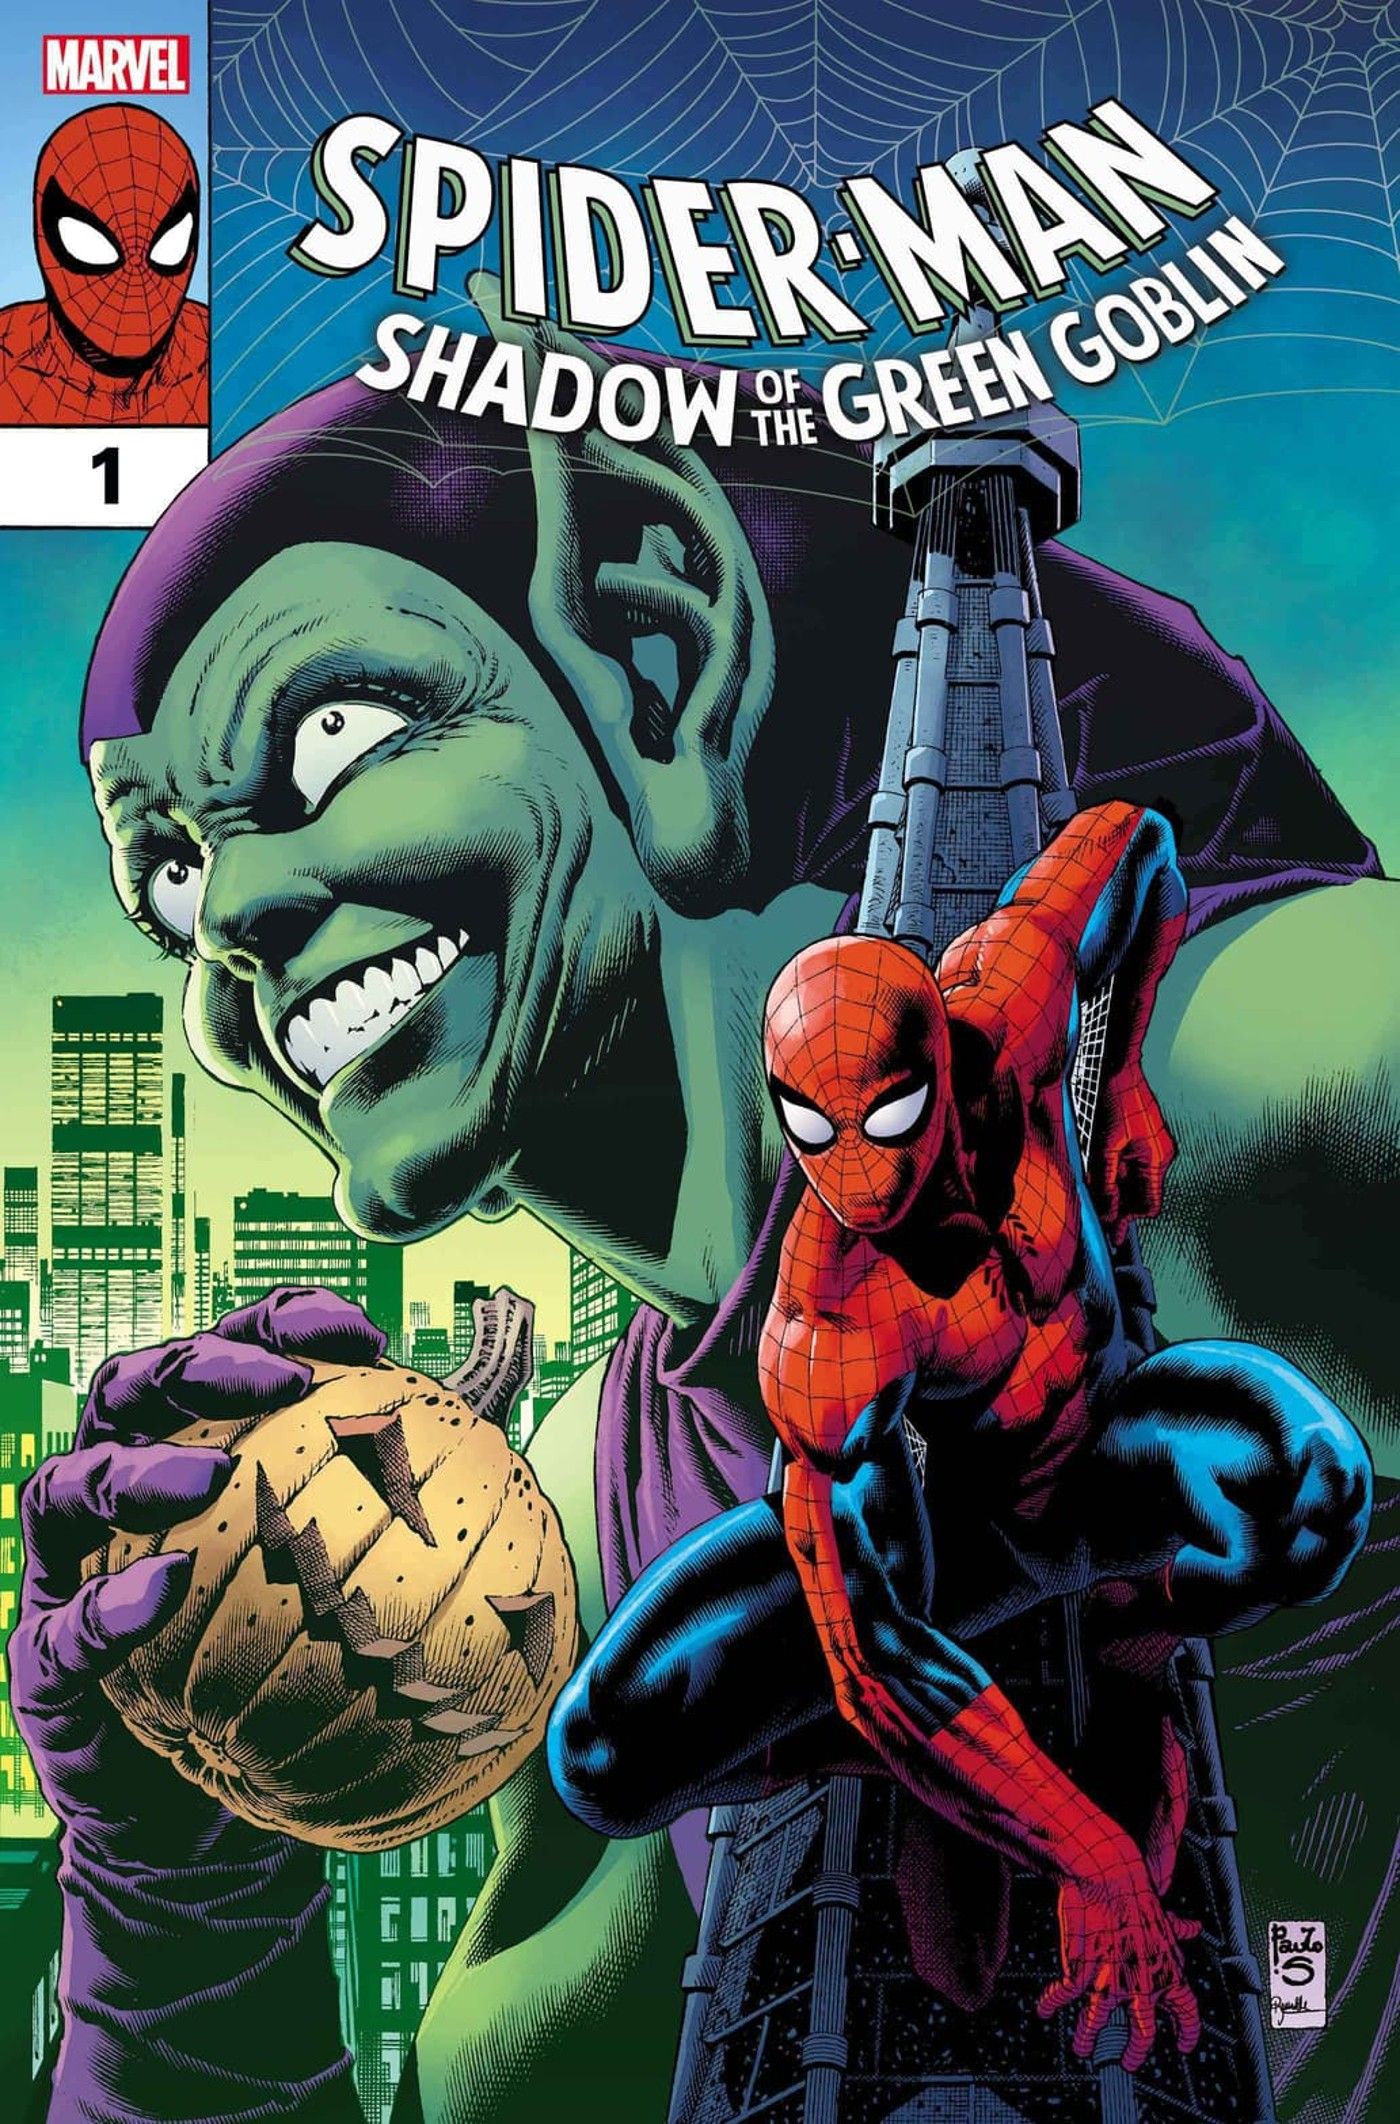 Spider-Man Lore Changes Forever as Marvel Spills the Secrets of the FIRST Goblin (Before Norman Osborn)